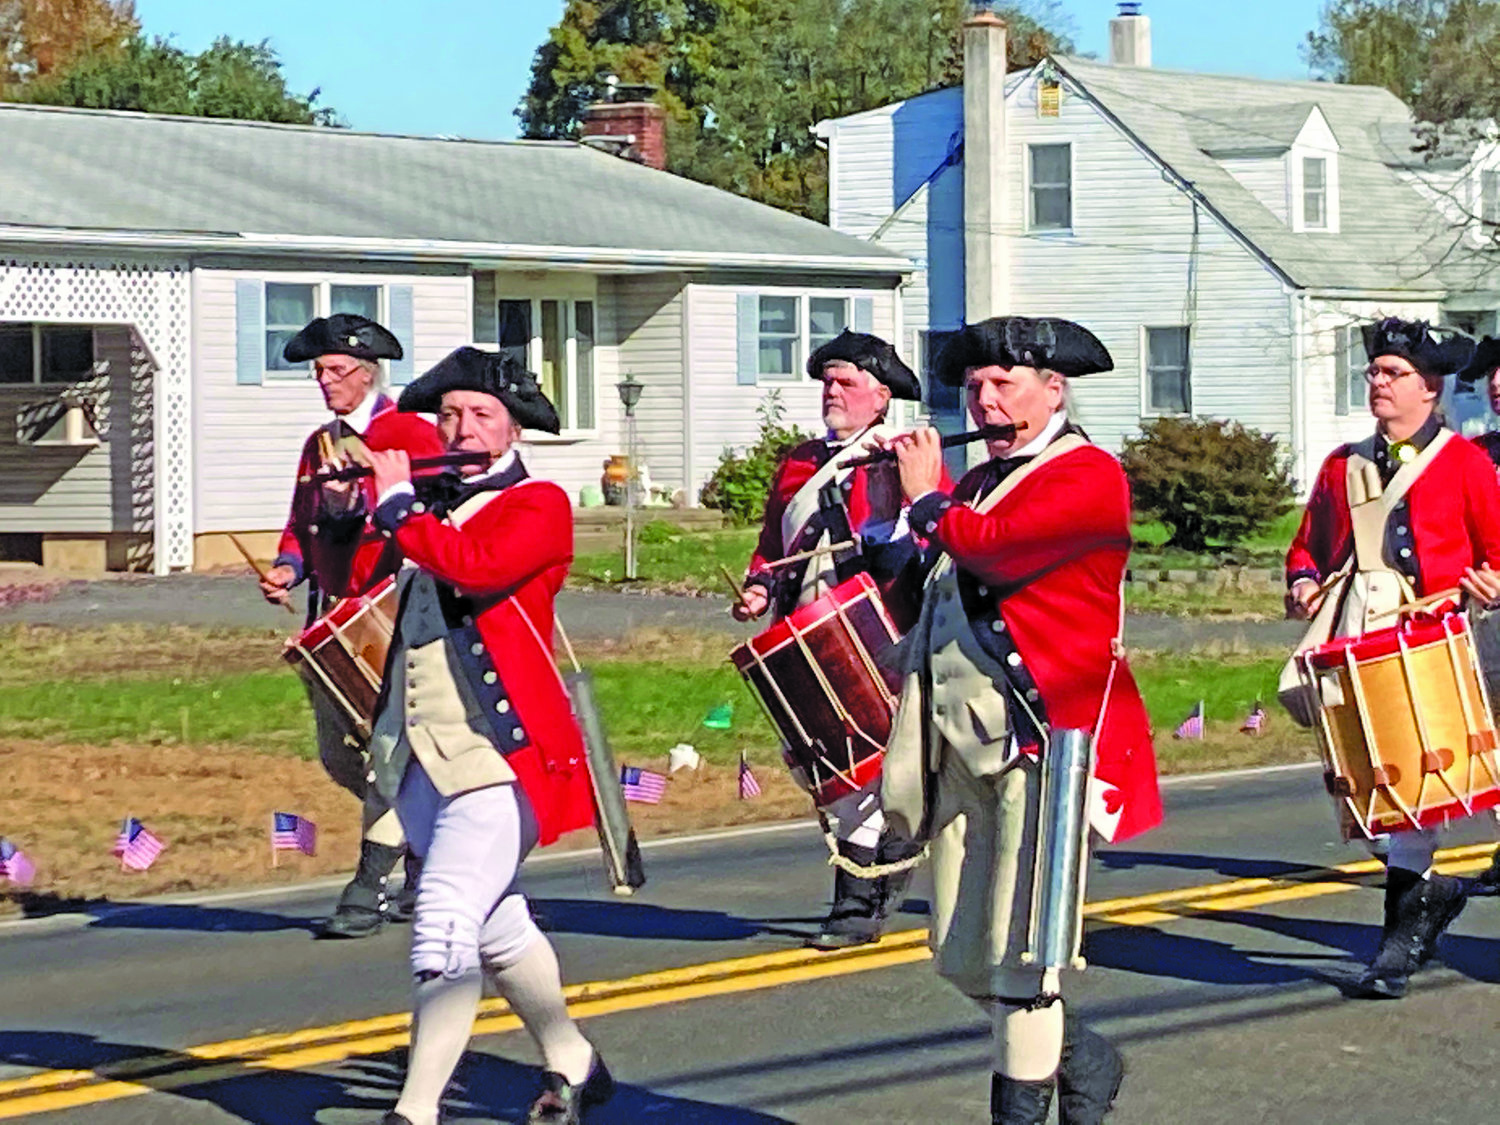 A fife and drum corps marches during the Lower Makefield Township Veterans Day Parade.